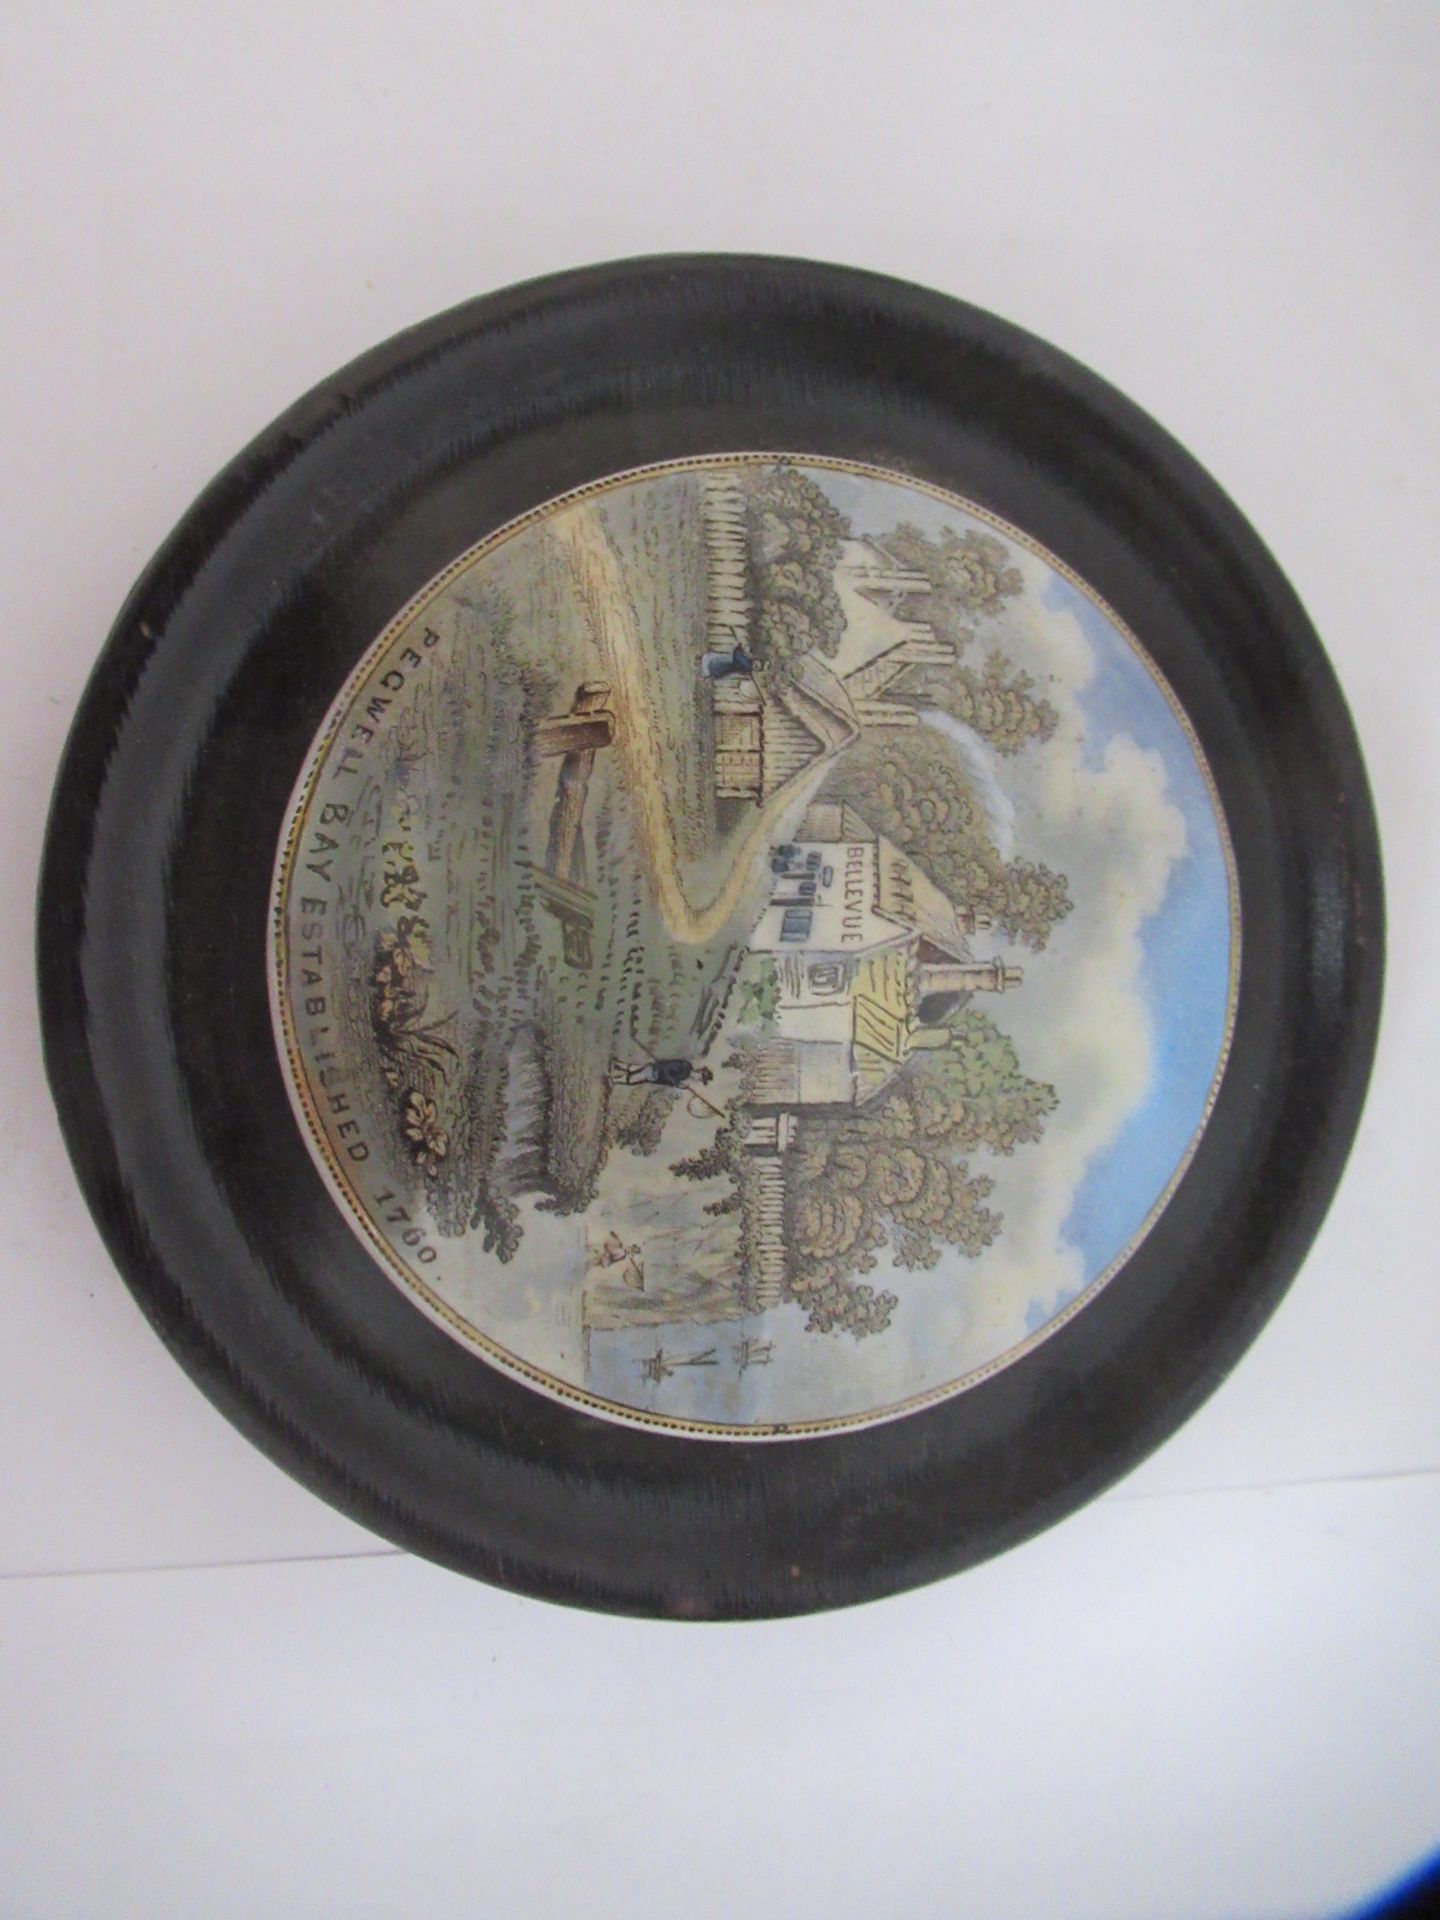 6x Prattware ceramic lids in wooden mounts including 'Paris Exhibition 1878', 'Pegwell Bay 1760' - Image 13 of 19